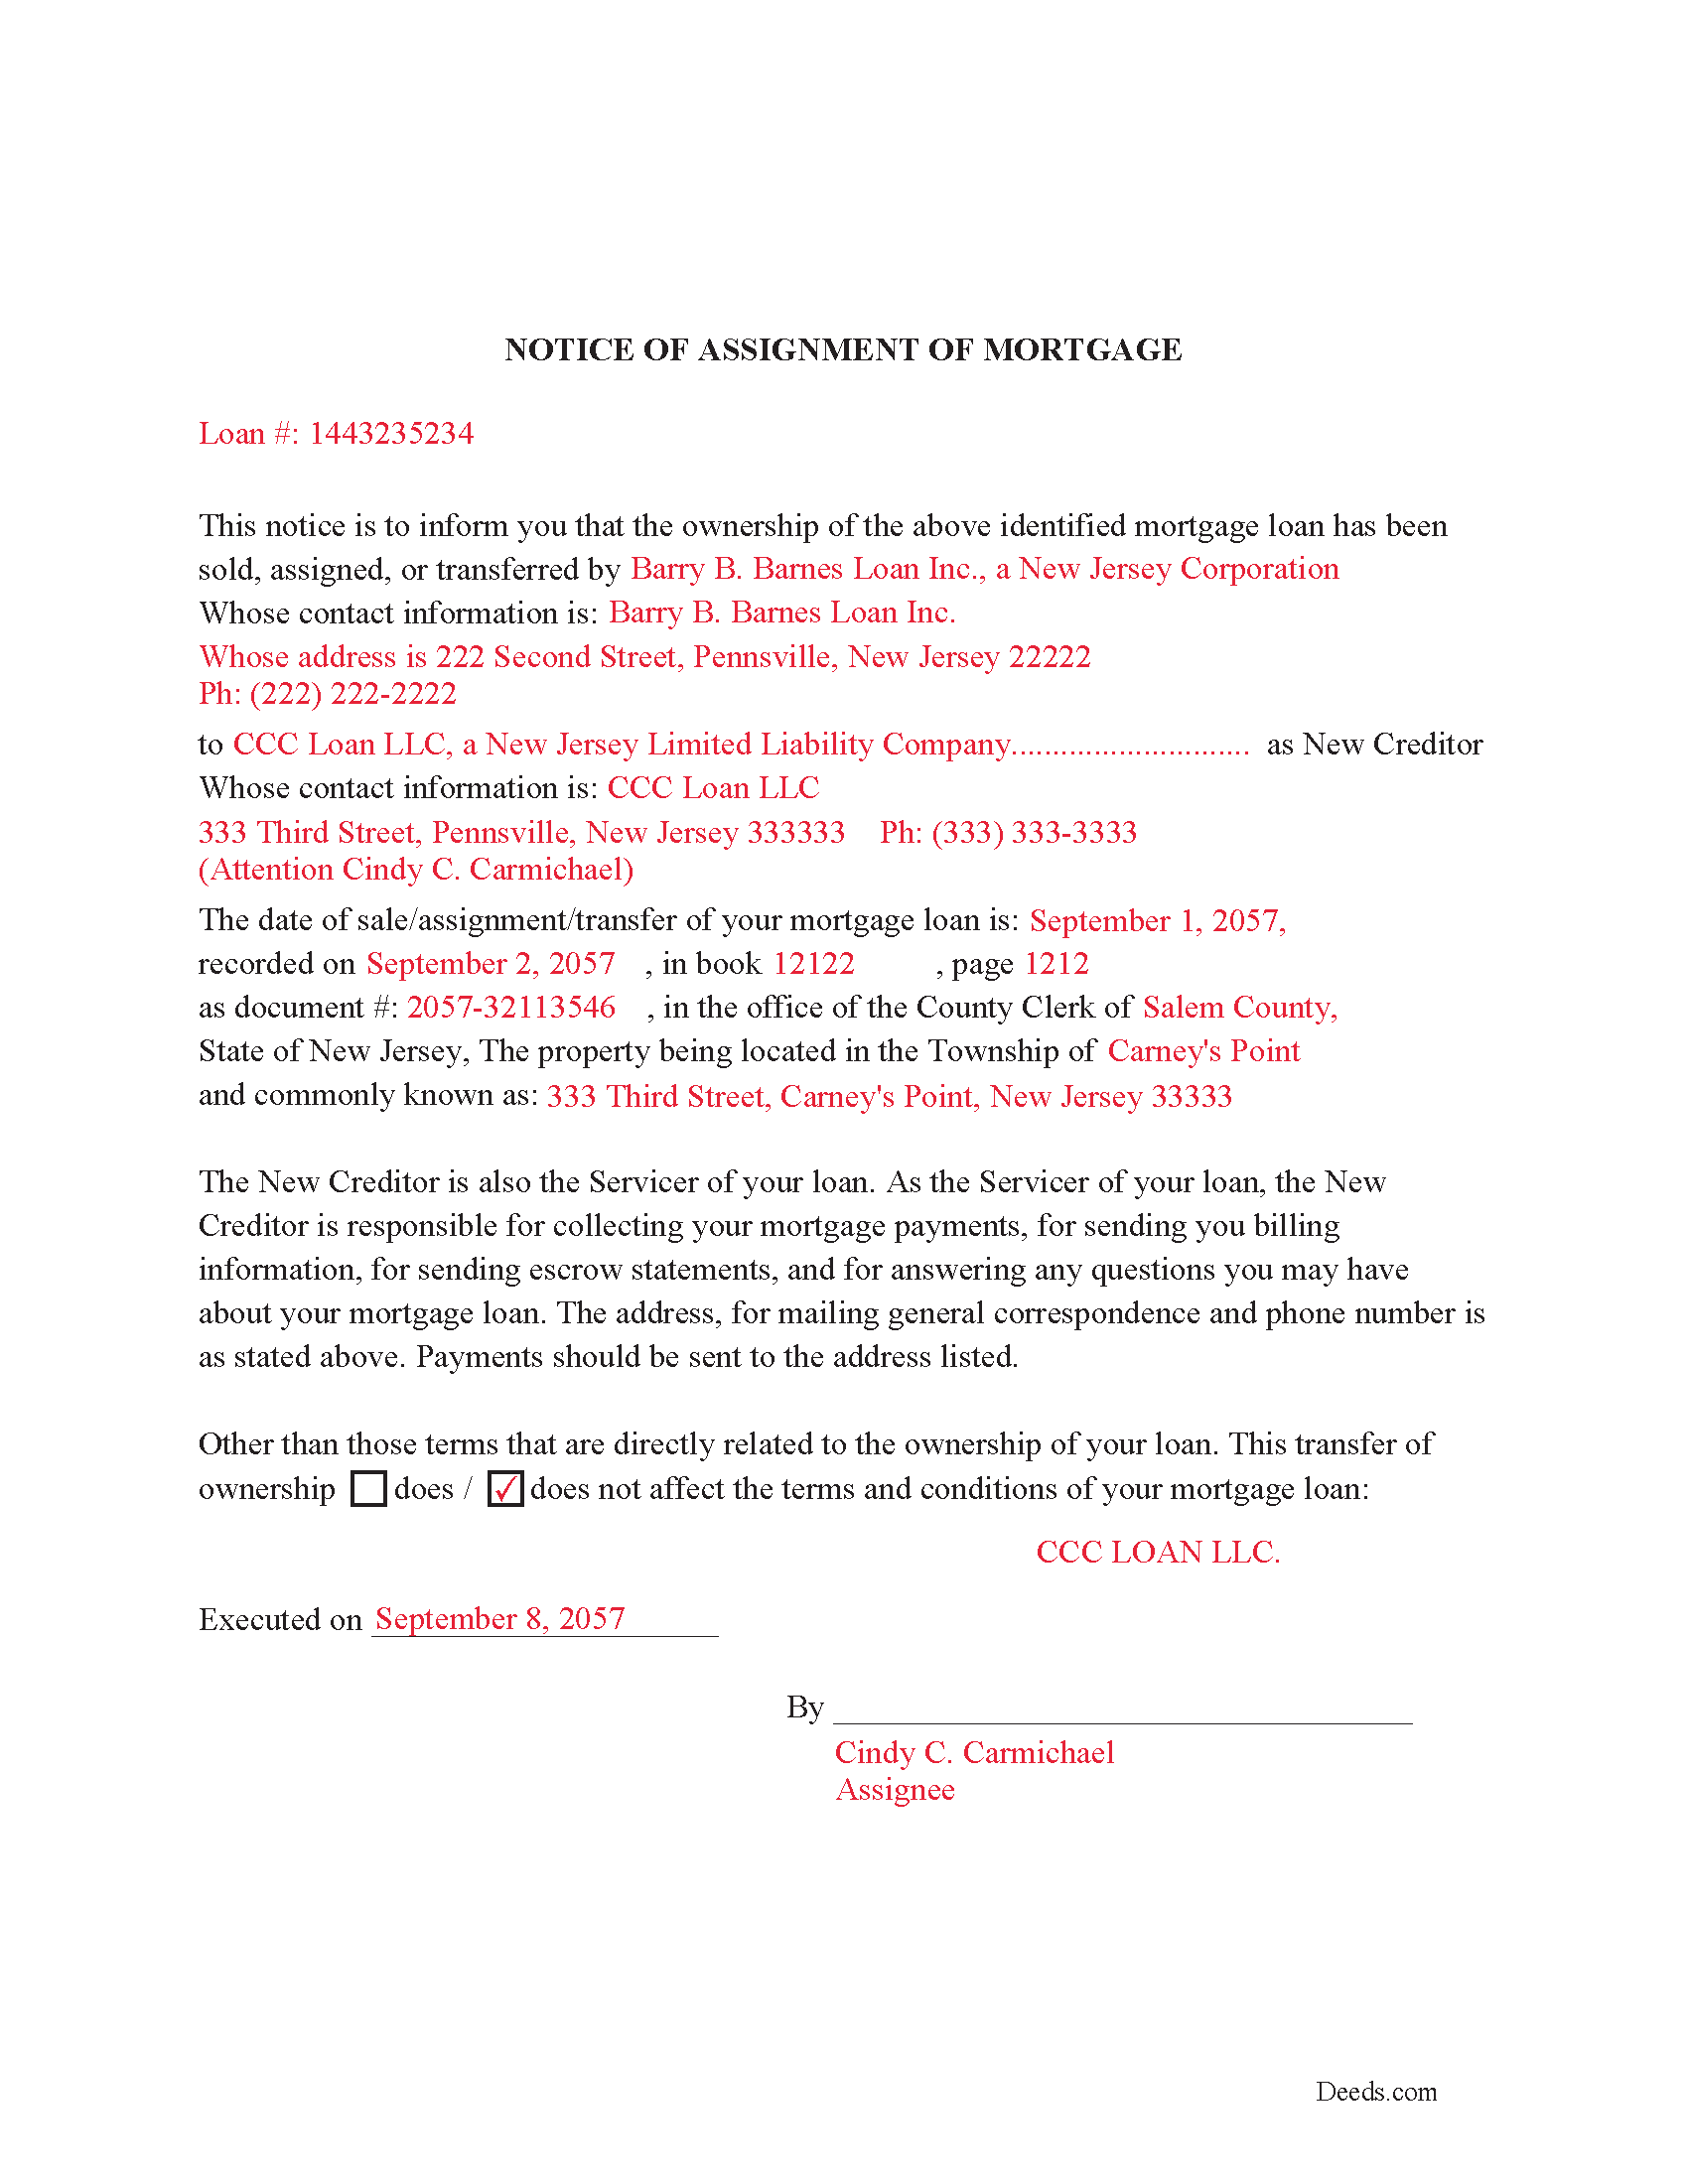 Completed Example of Notice of Assignment Document